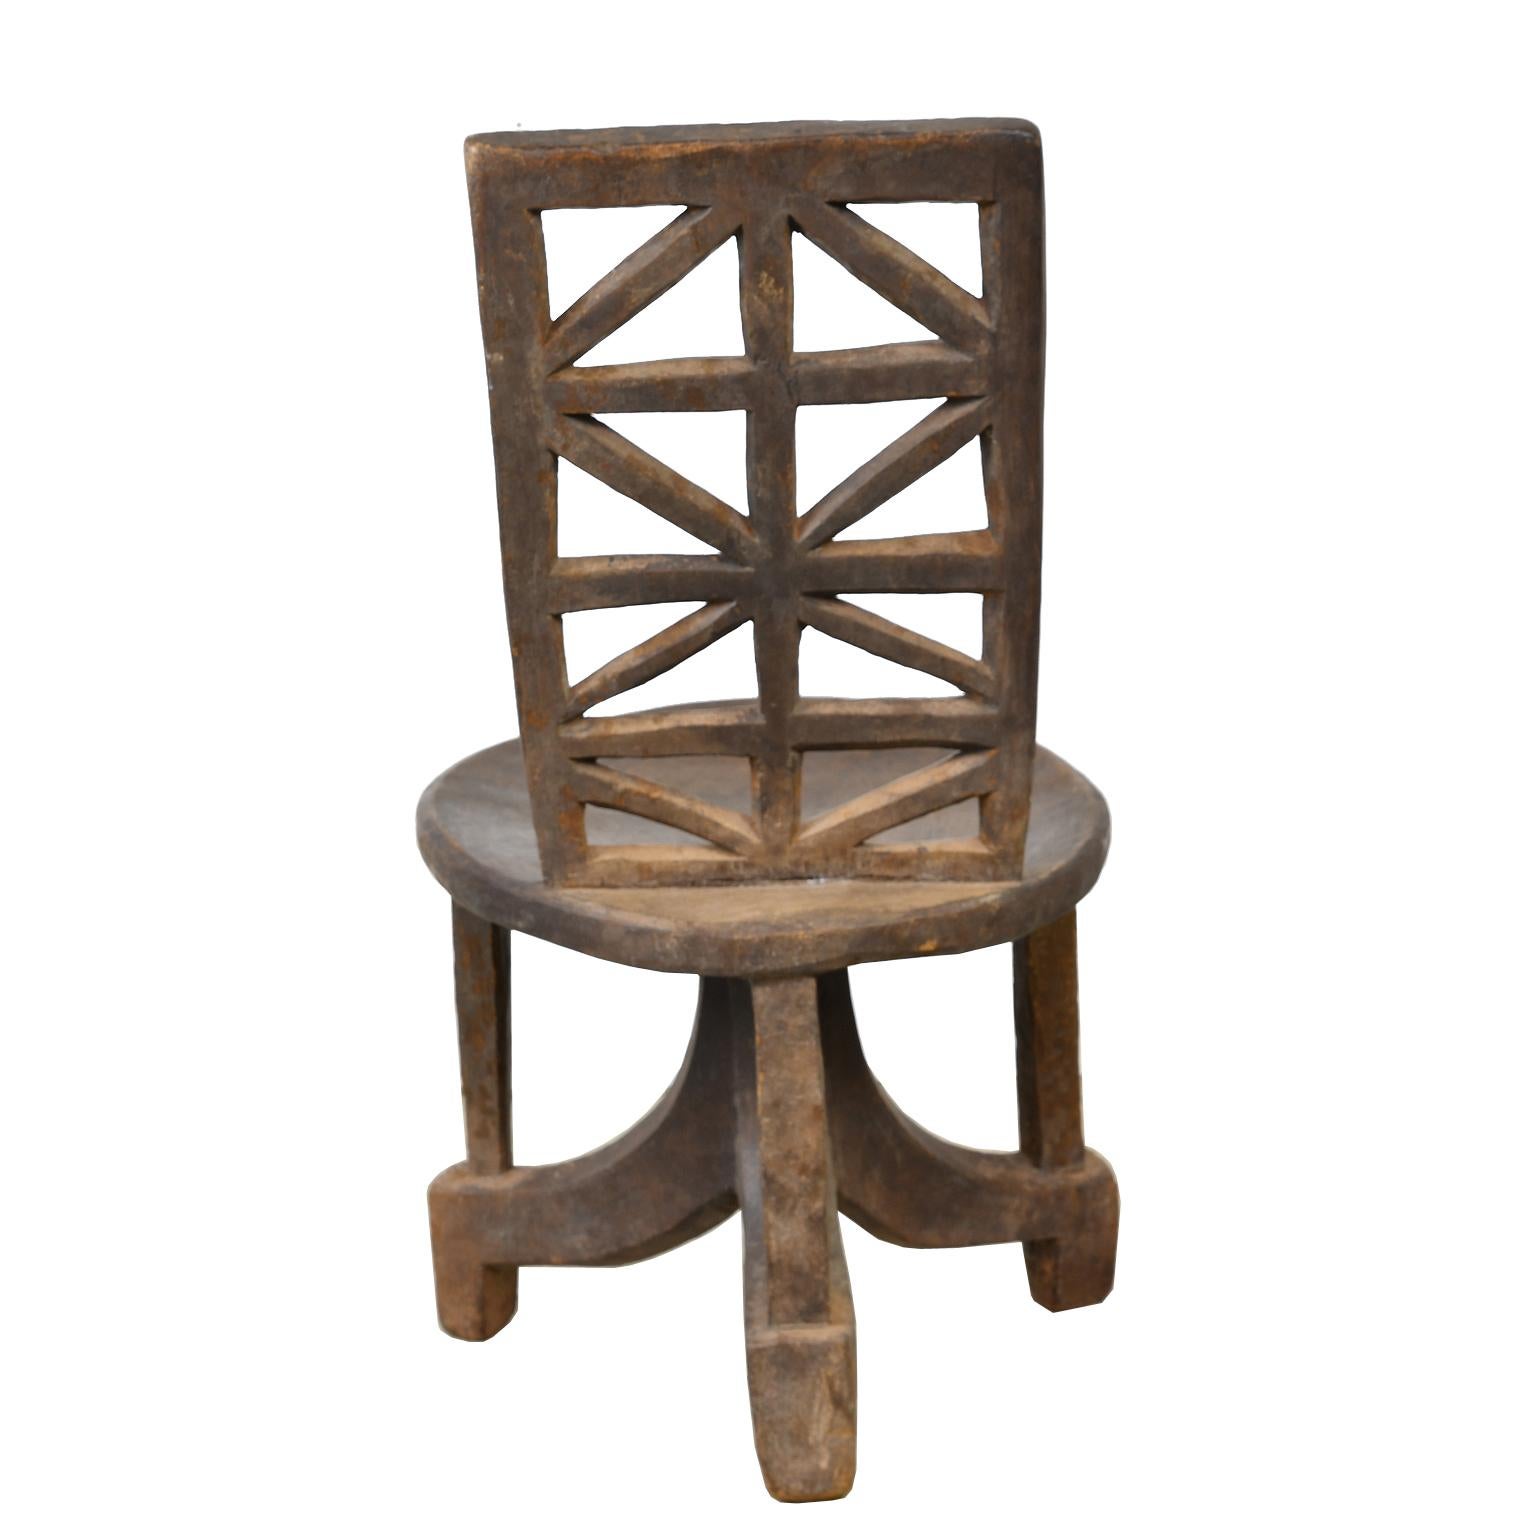 Ethiopian African Chieftain Chair from Gurage Tribe in Ethiopia, circa Early 1900's